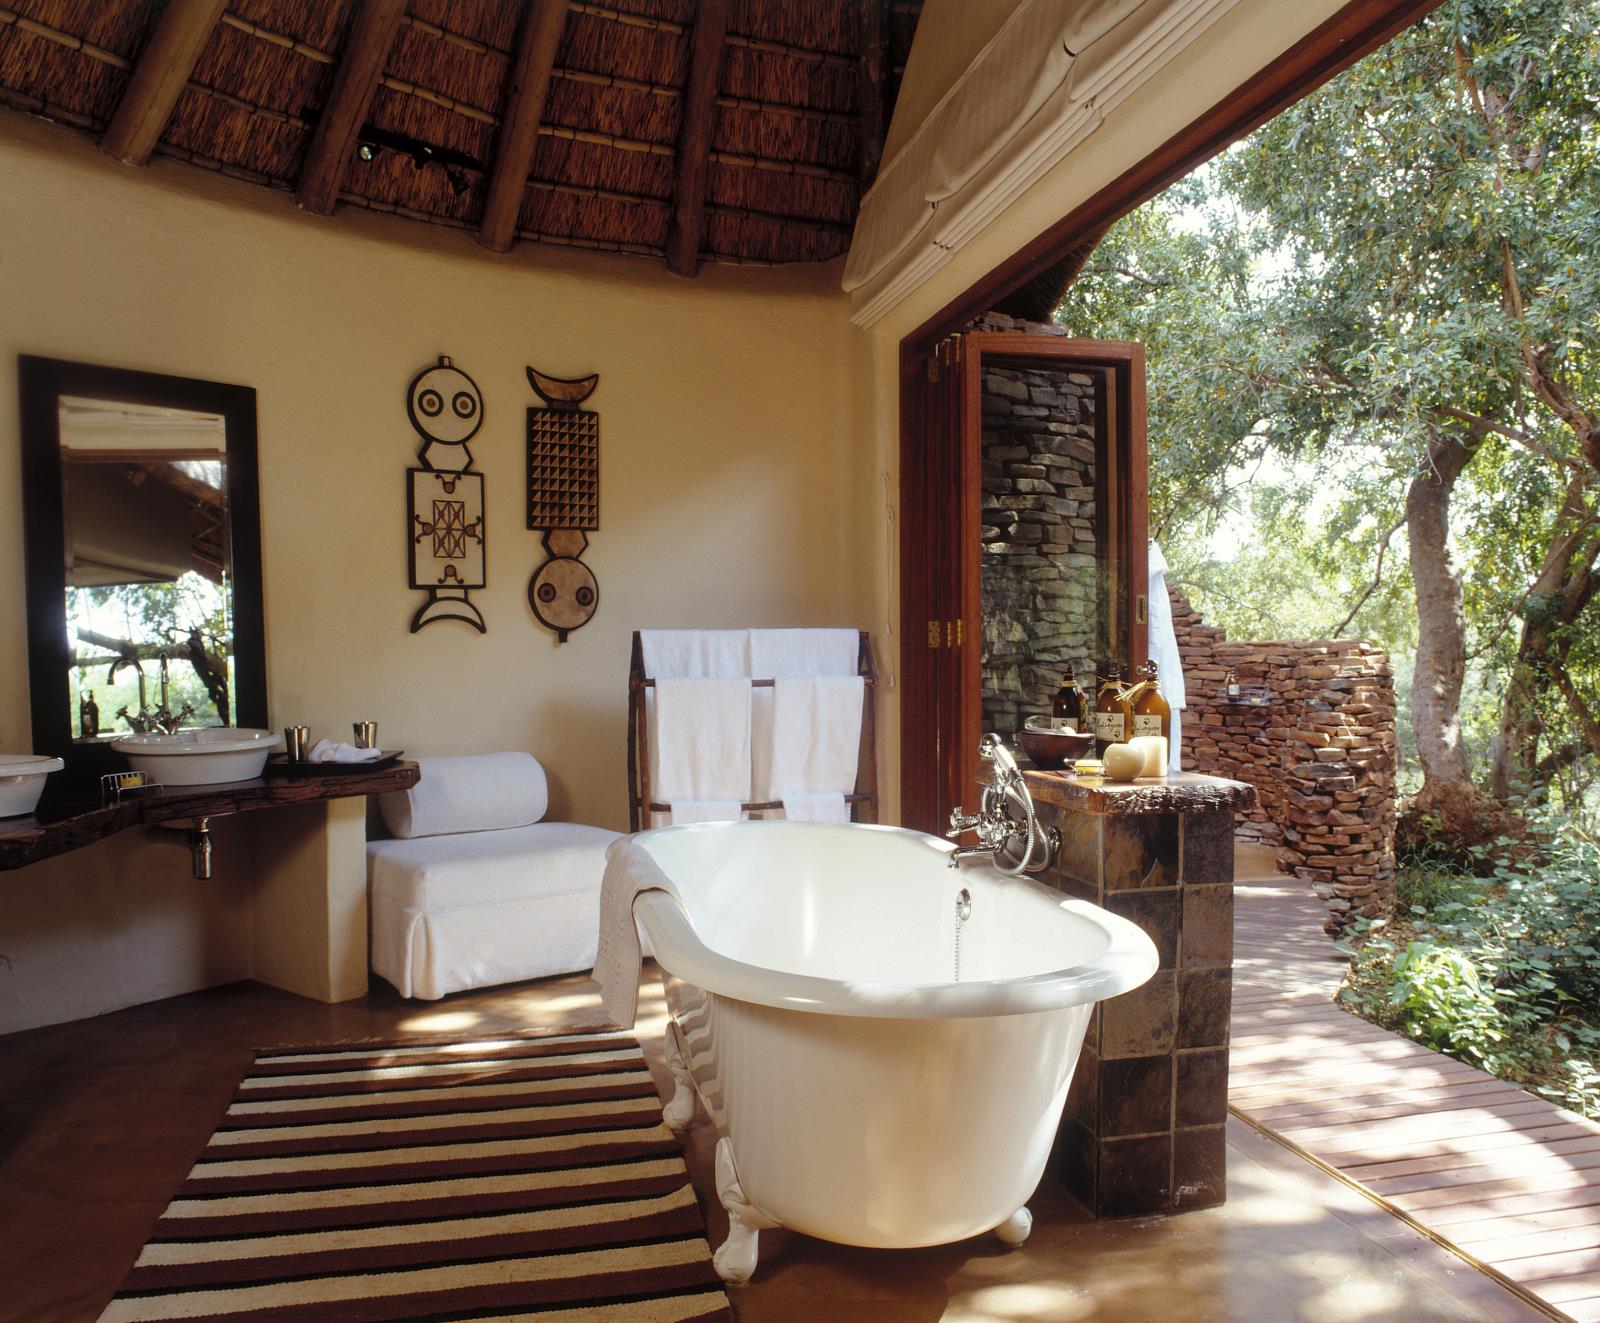 Bathroom at Makanyane - Original South Africa and Mozambique